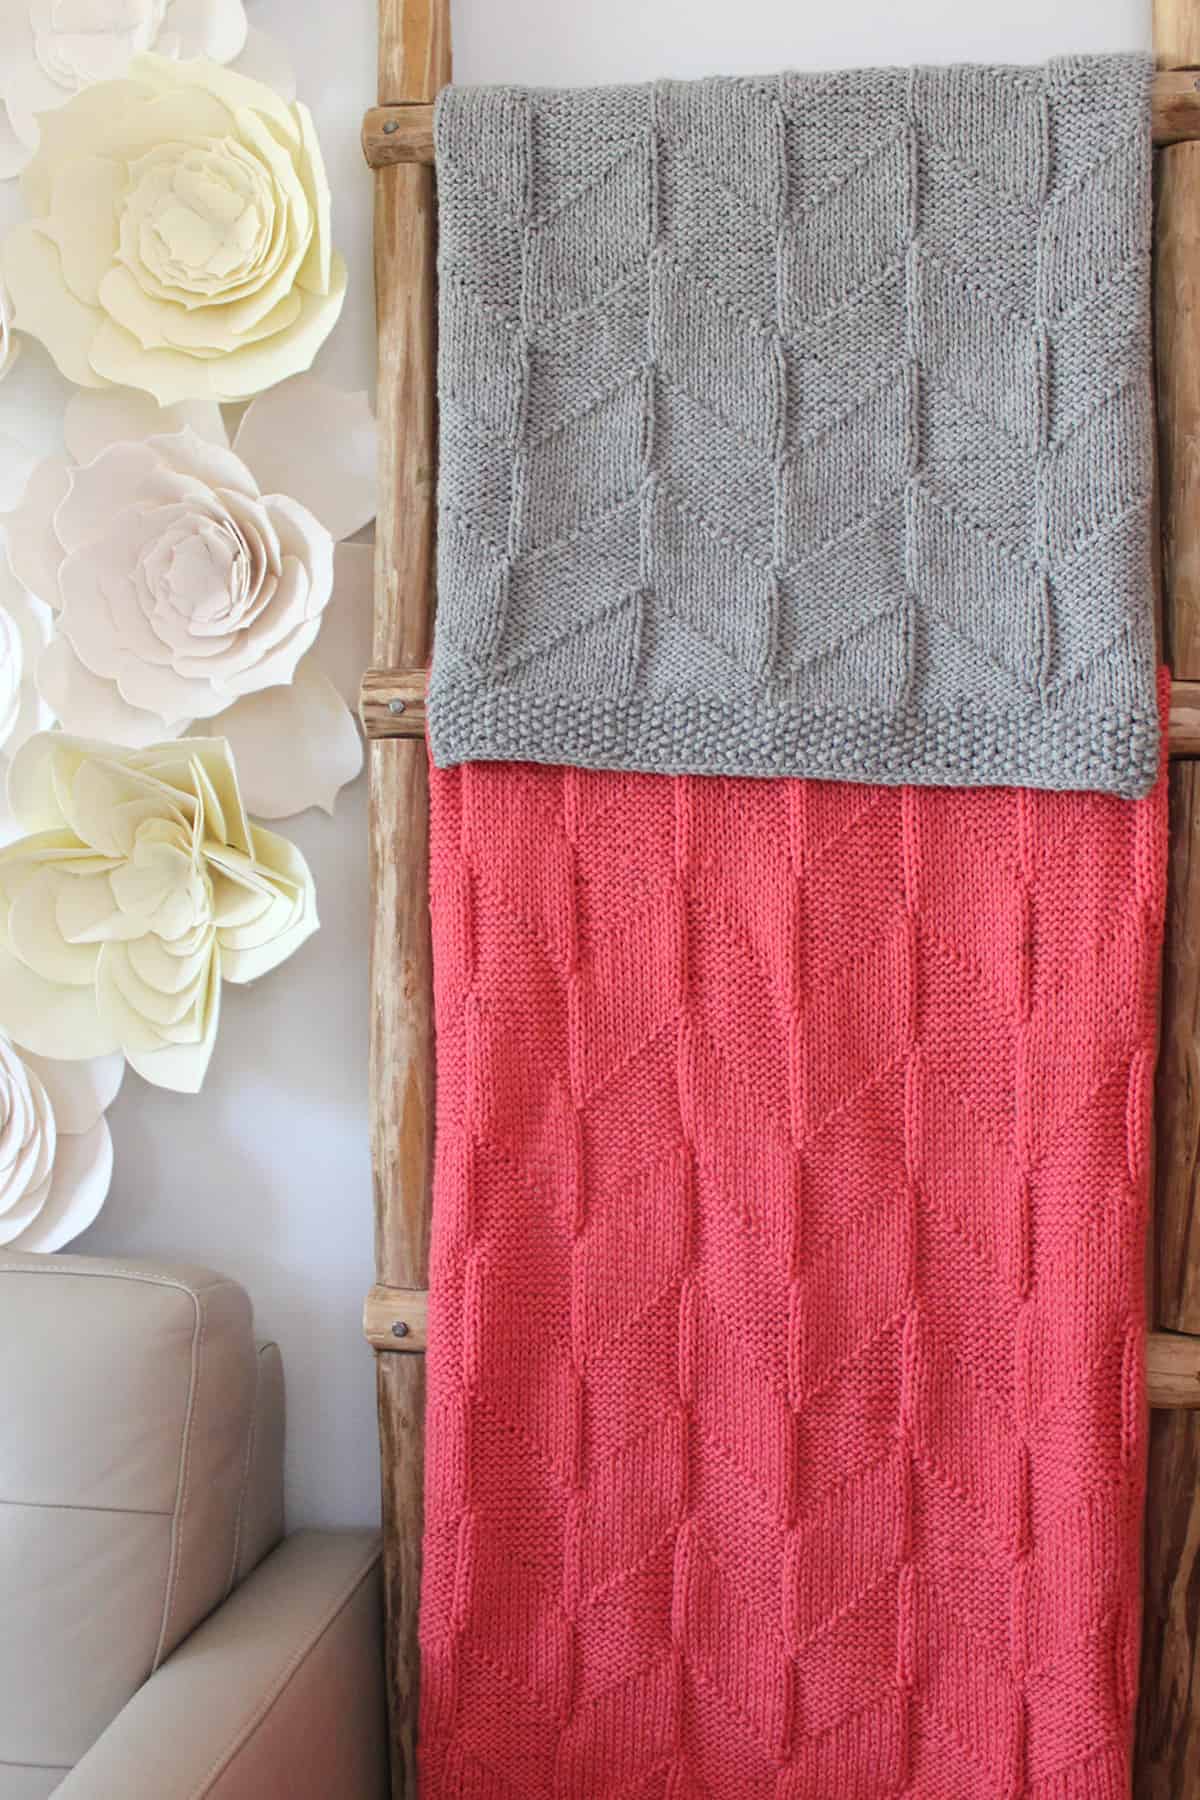 Point Reyes Blanket in parallelogram stitch designed by Studio Knit in grey and peach colored yarn displayed on ladder.